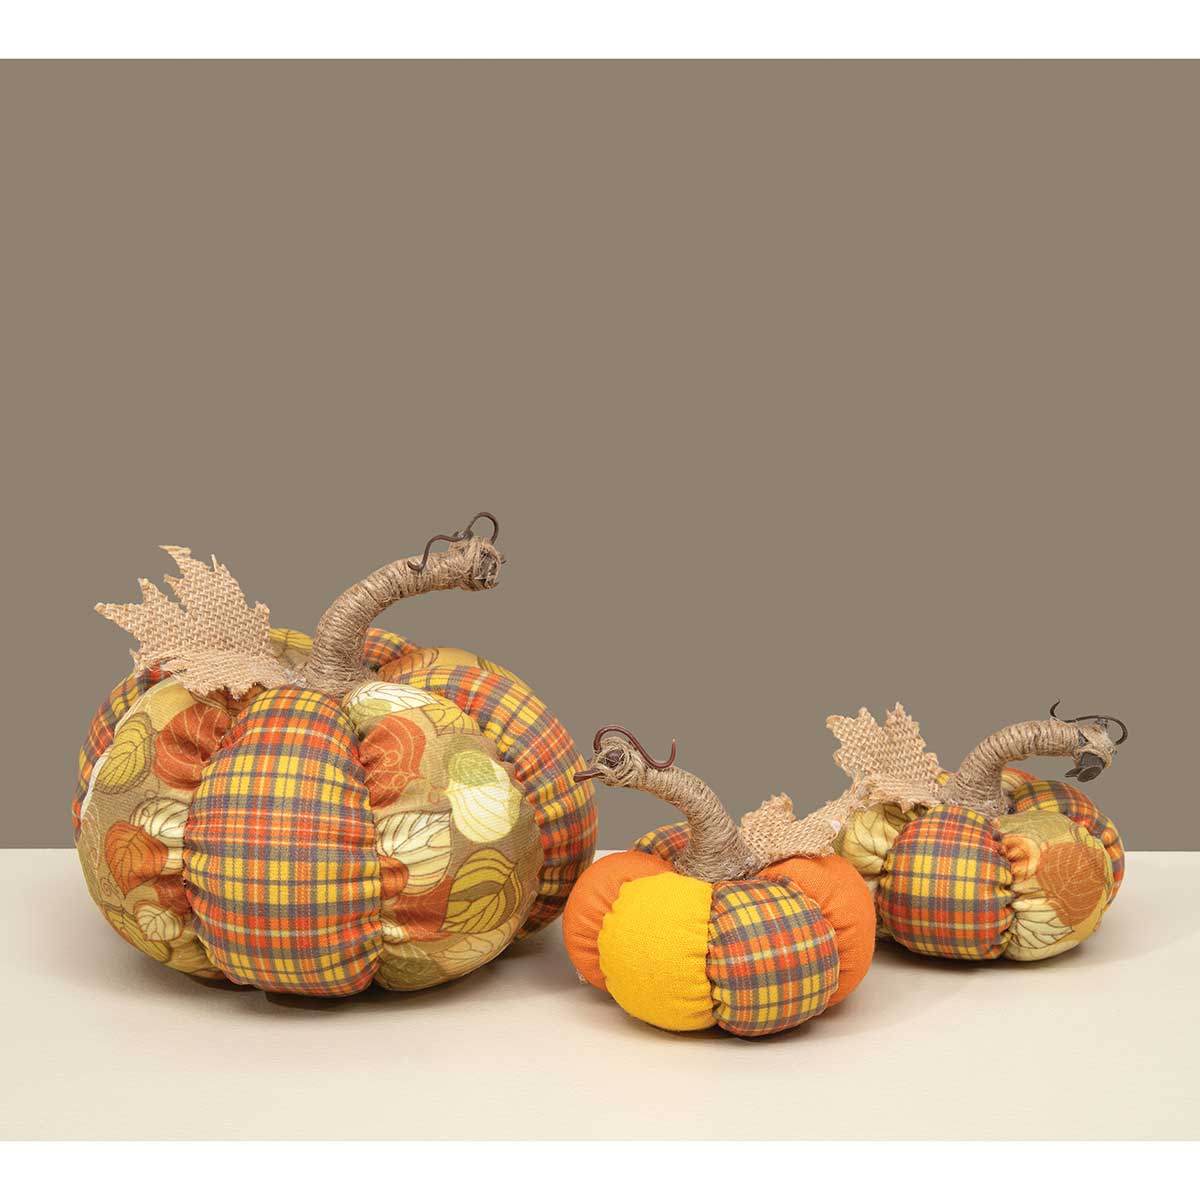 PLUSH PUMPKIN LARGE 7.5IN X 5IN WITH 1IN STEM POLYESTER/TWINE - Click Image to Close